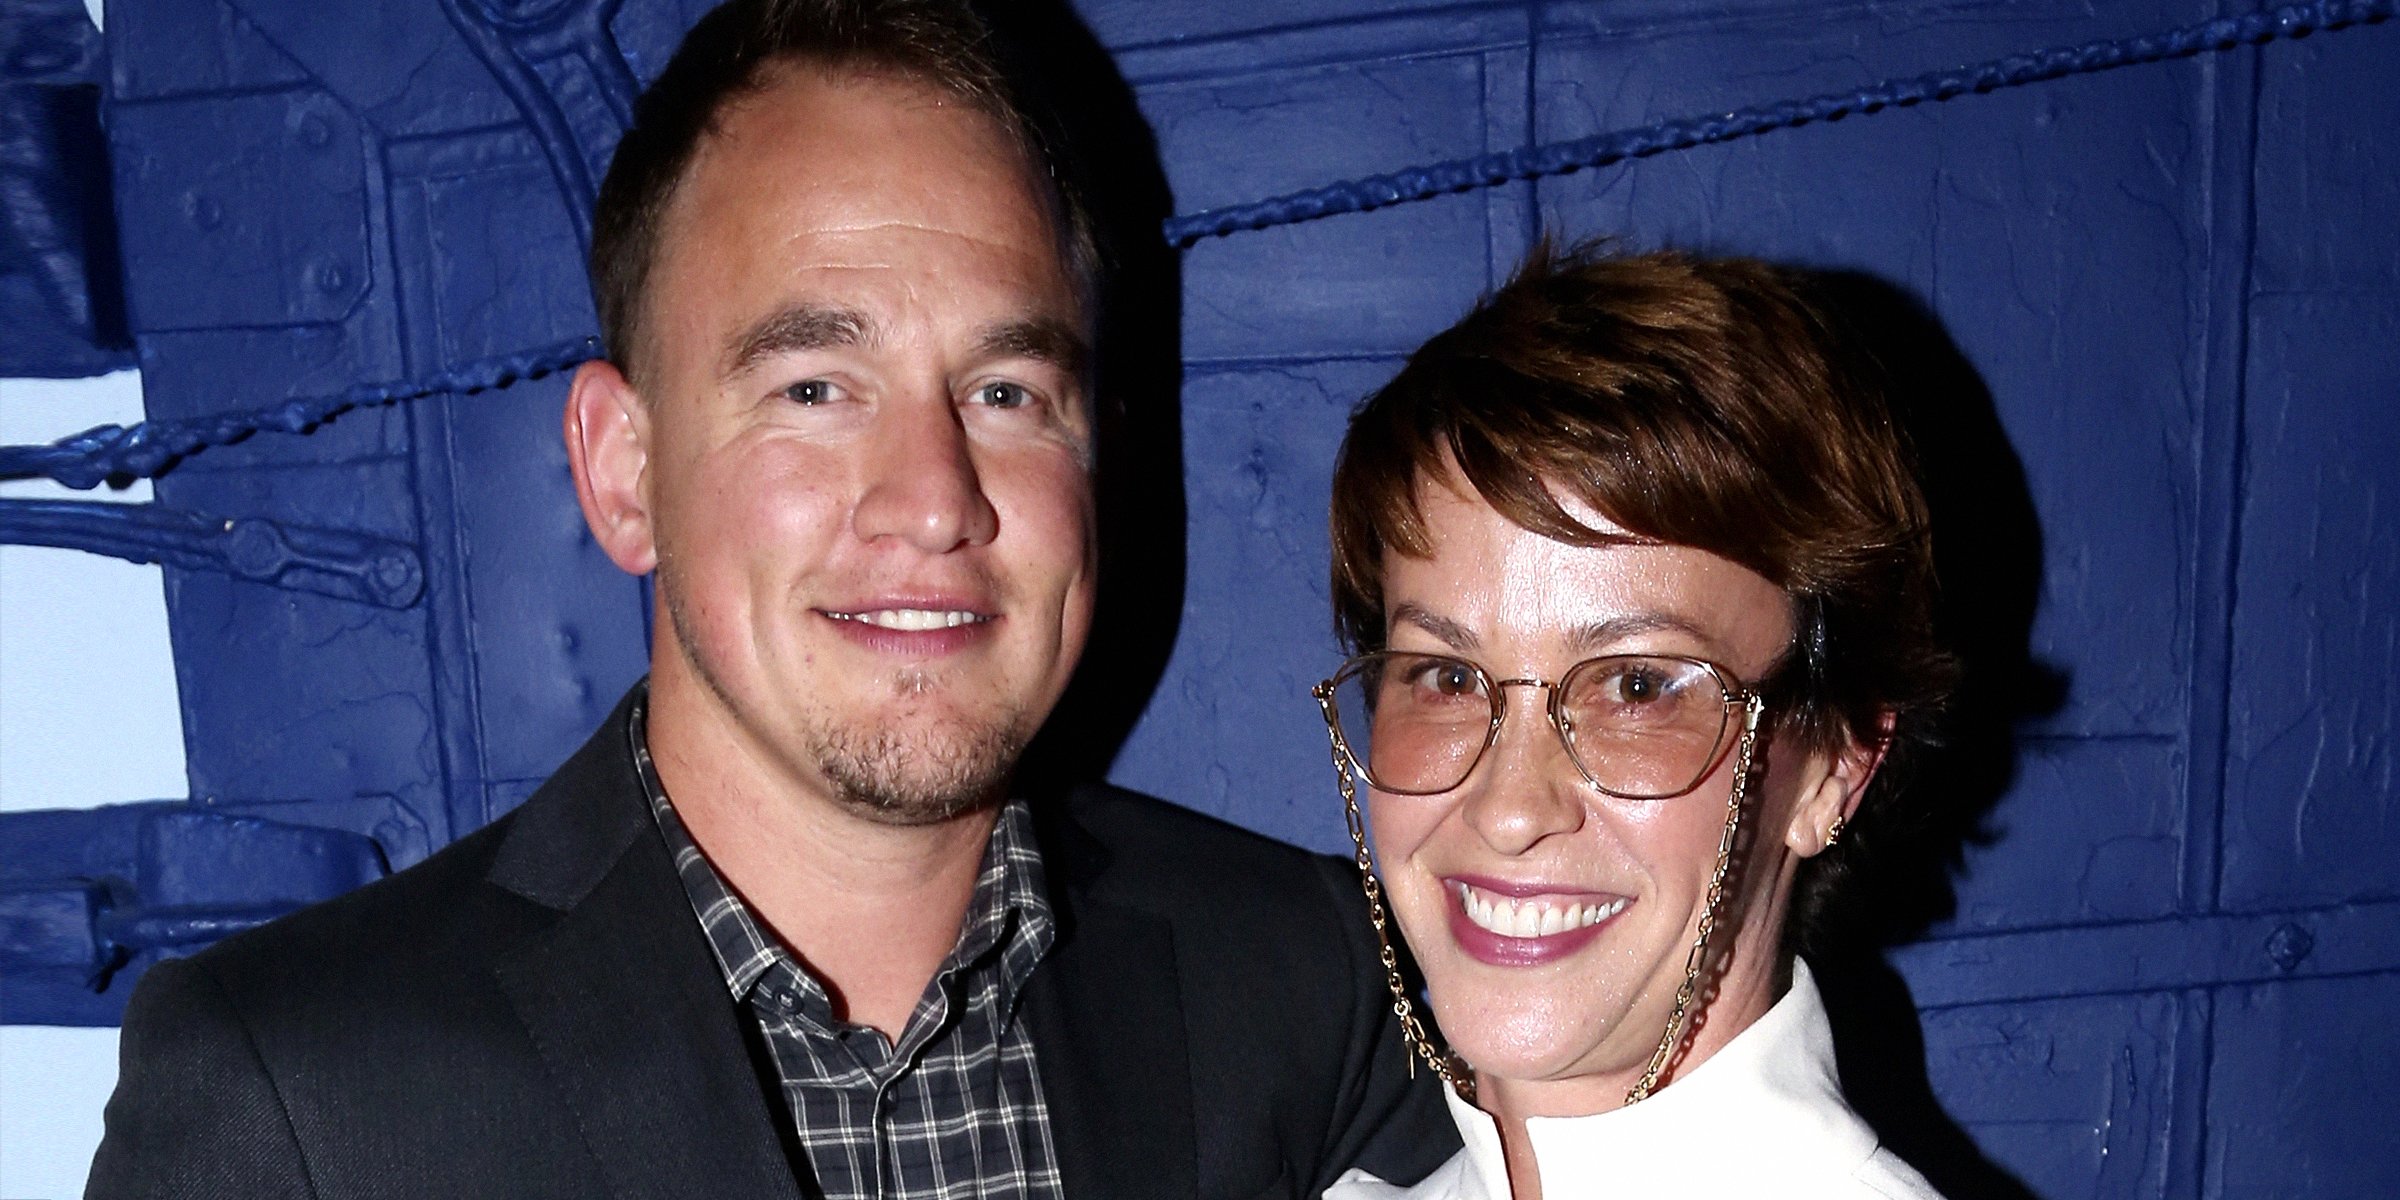 Alanis Morissette and Souleye | Source: Getty Images